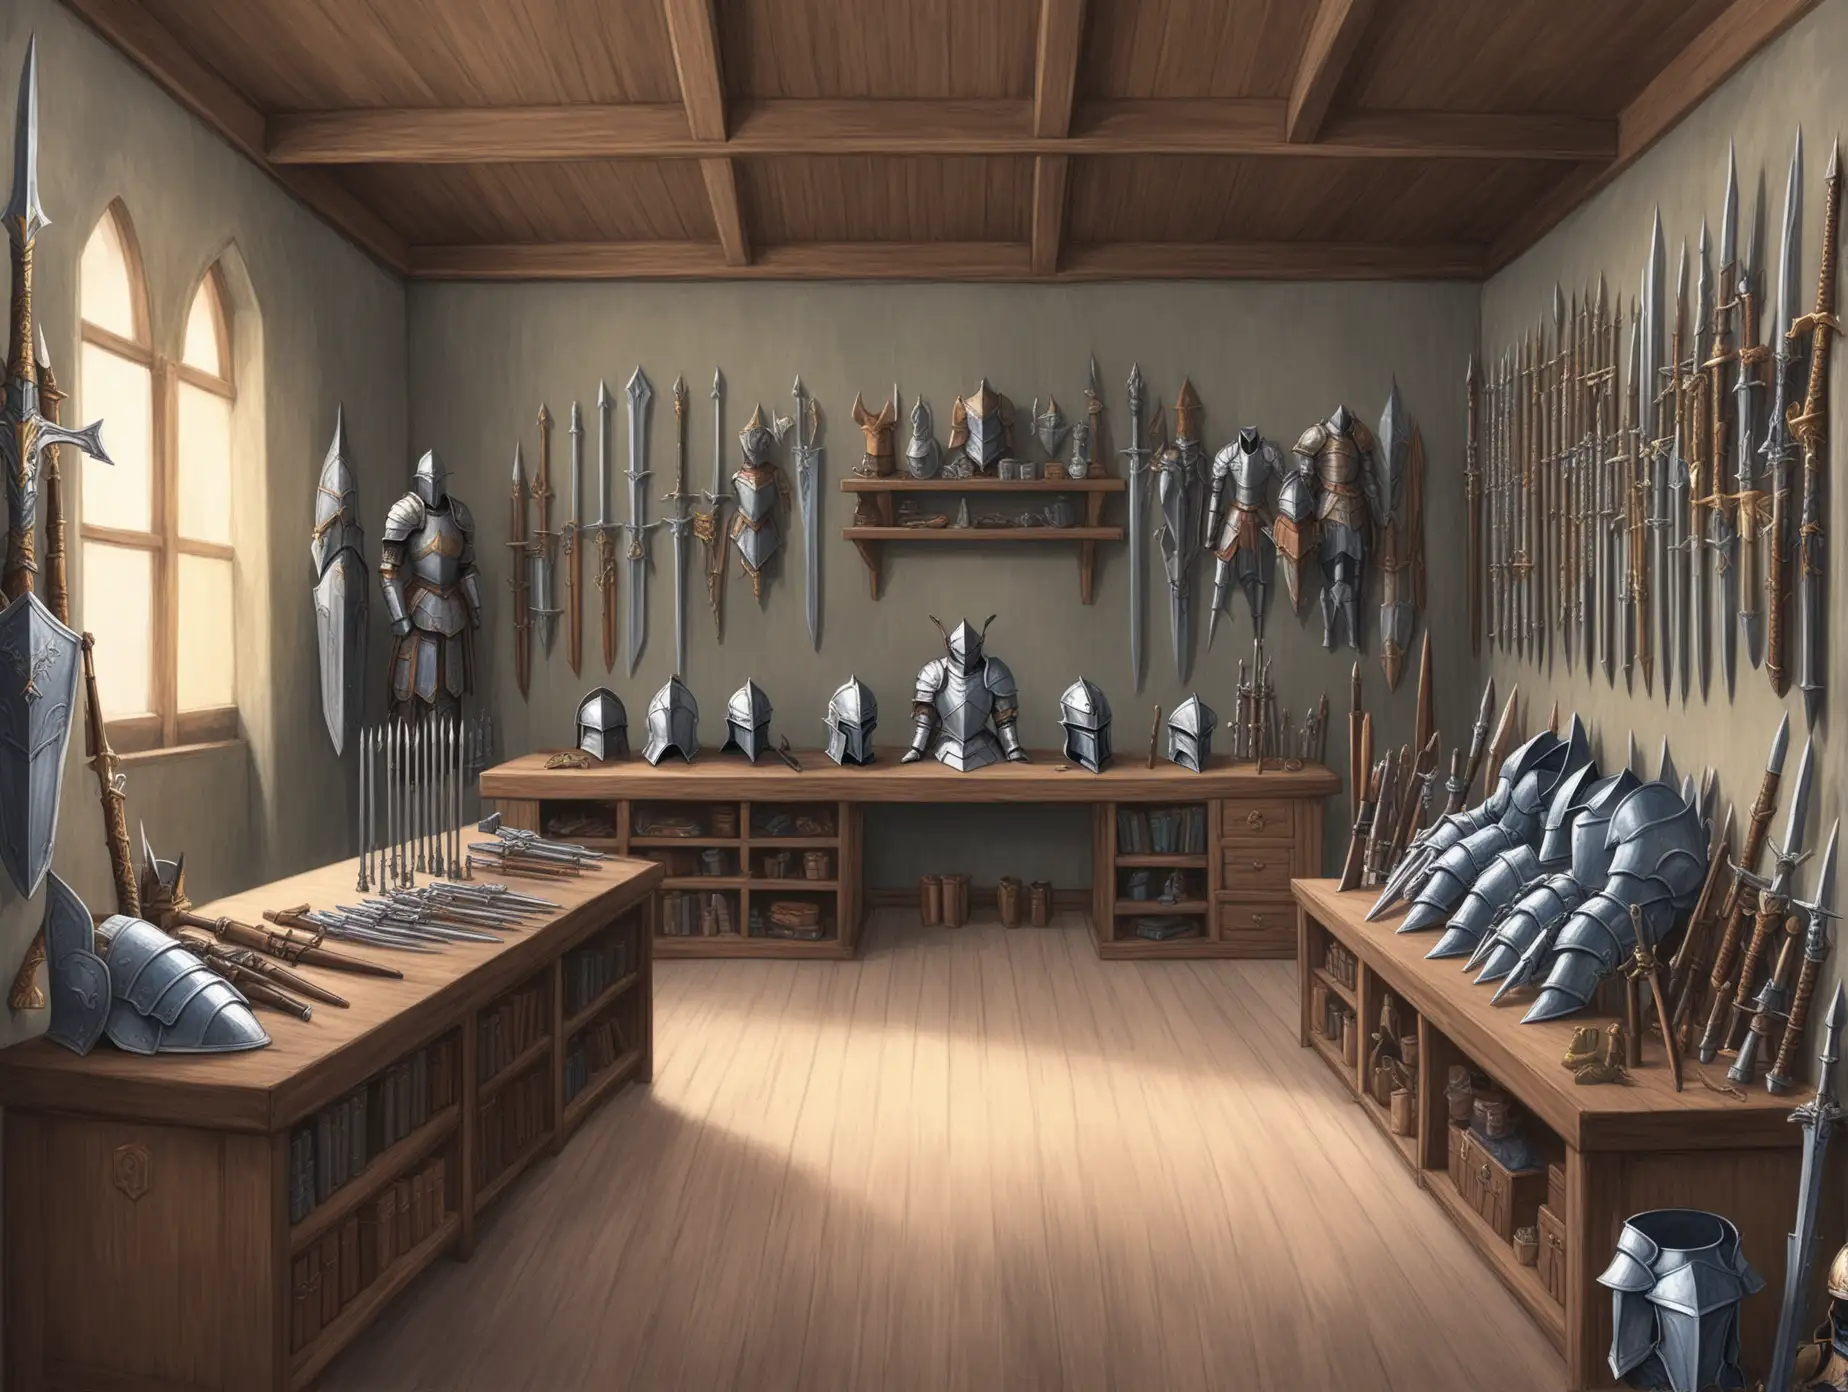 The armorer's room with fantasy-style armor and weapons and without people, pastel